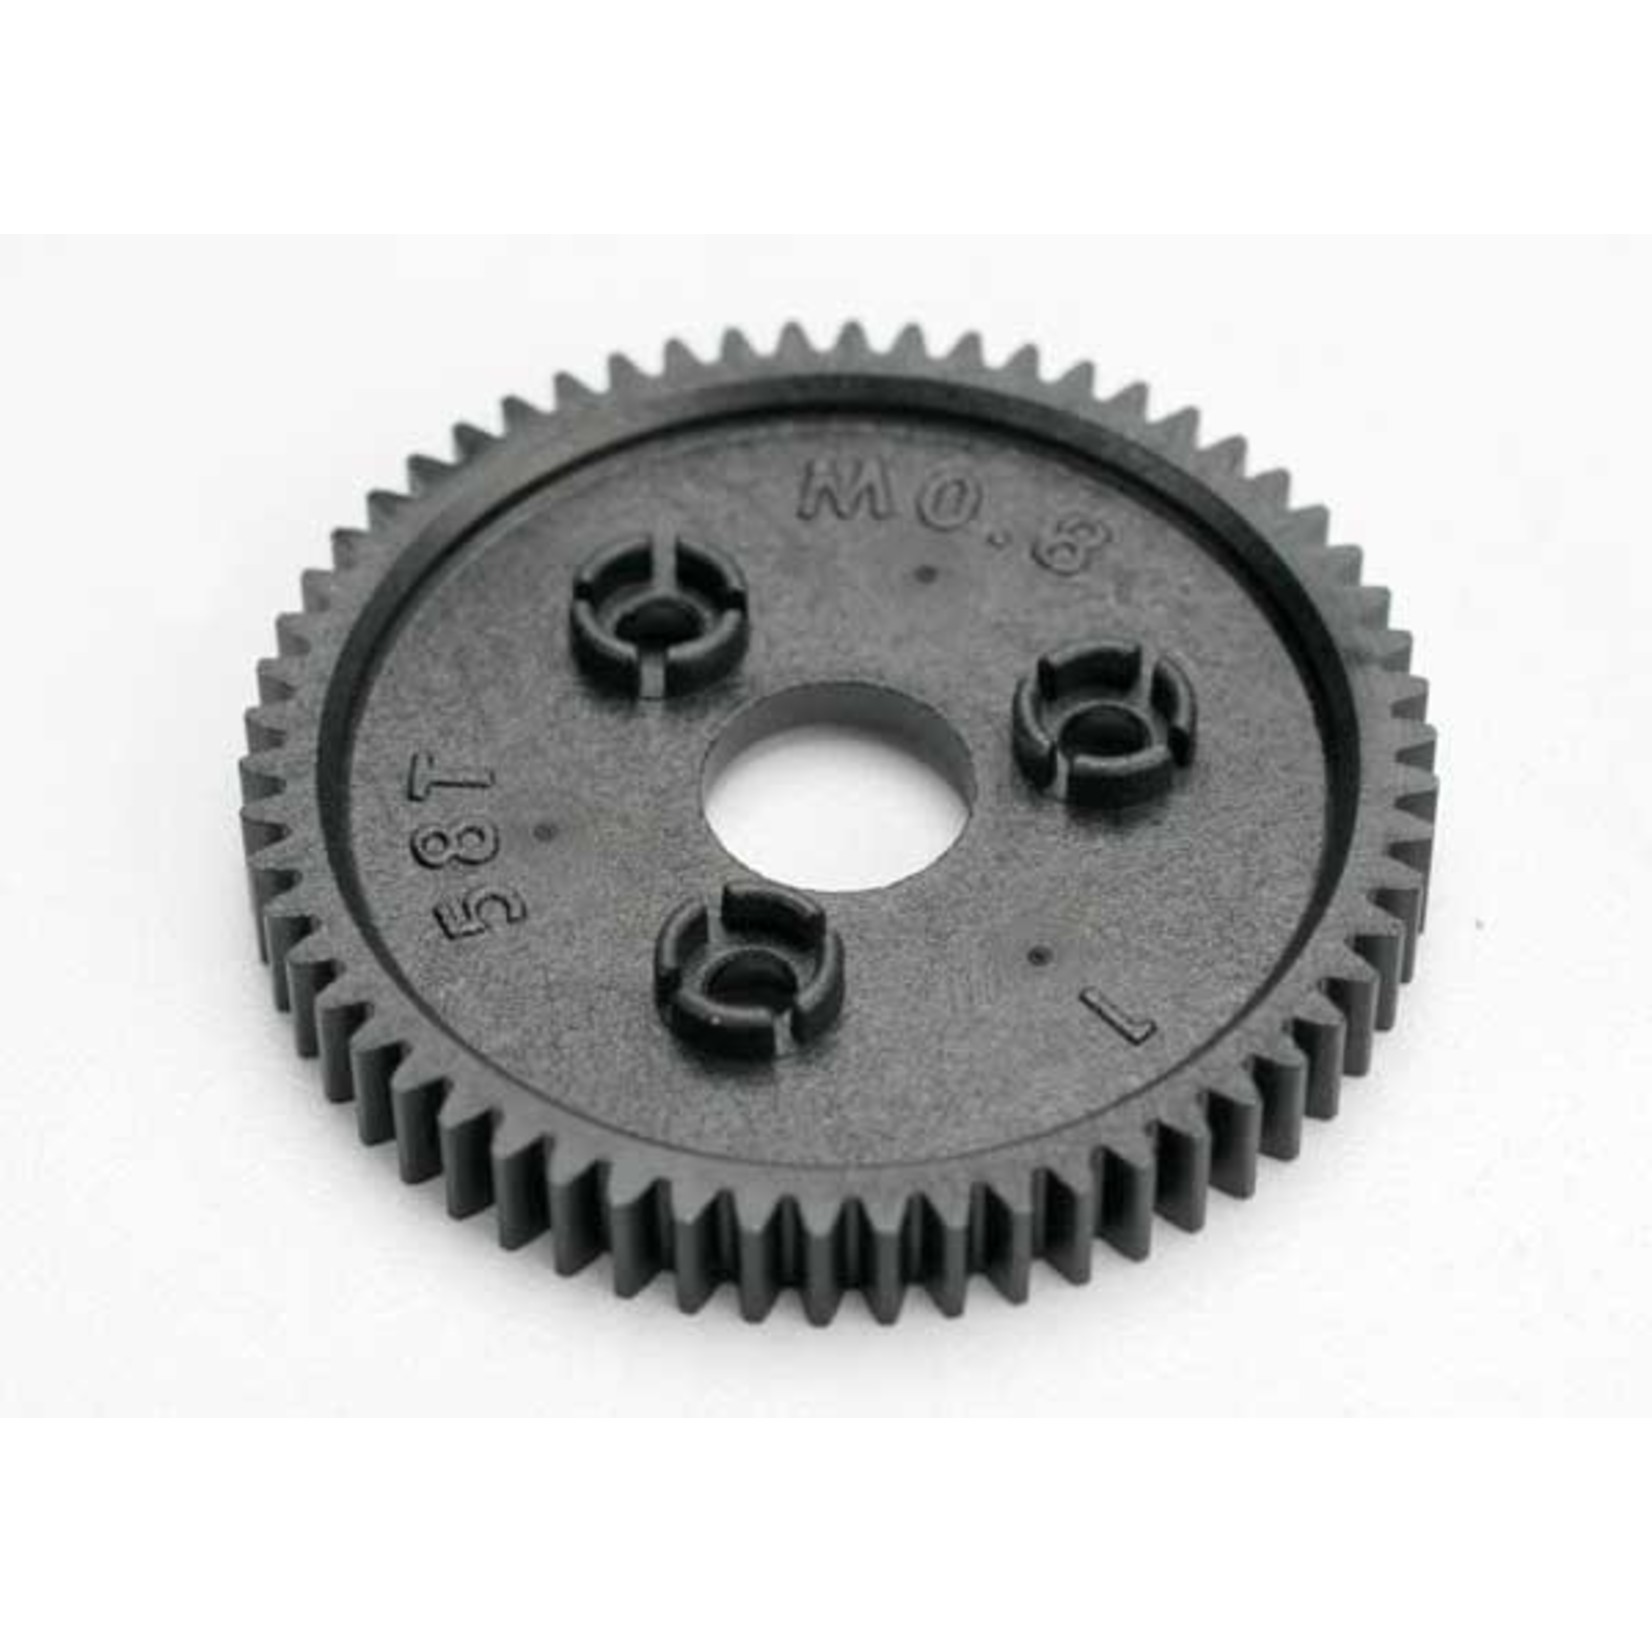 Traxxas 3958 - Spur gear, 58-tooth (0.8 metric pitch, comp